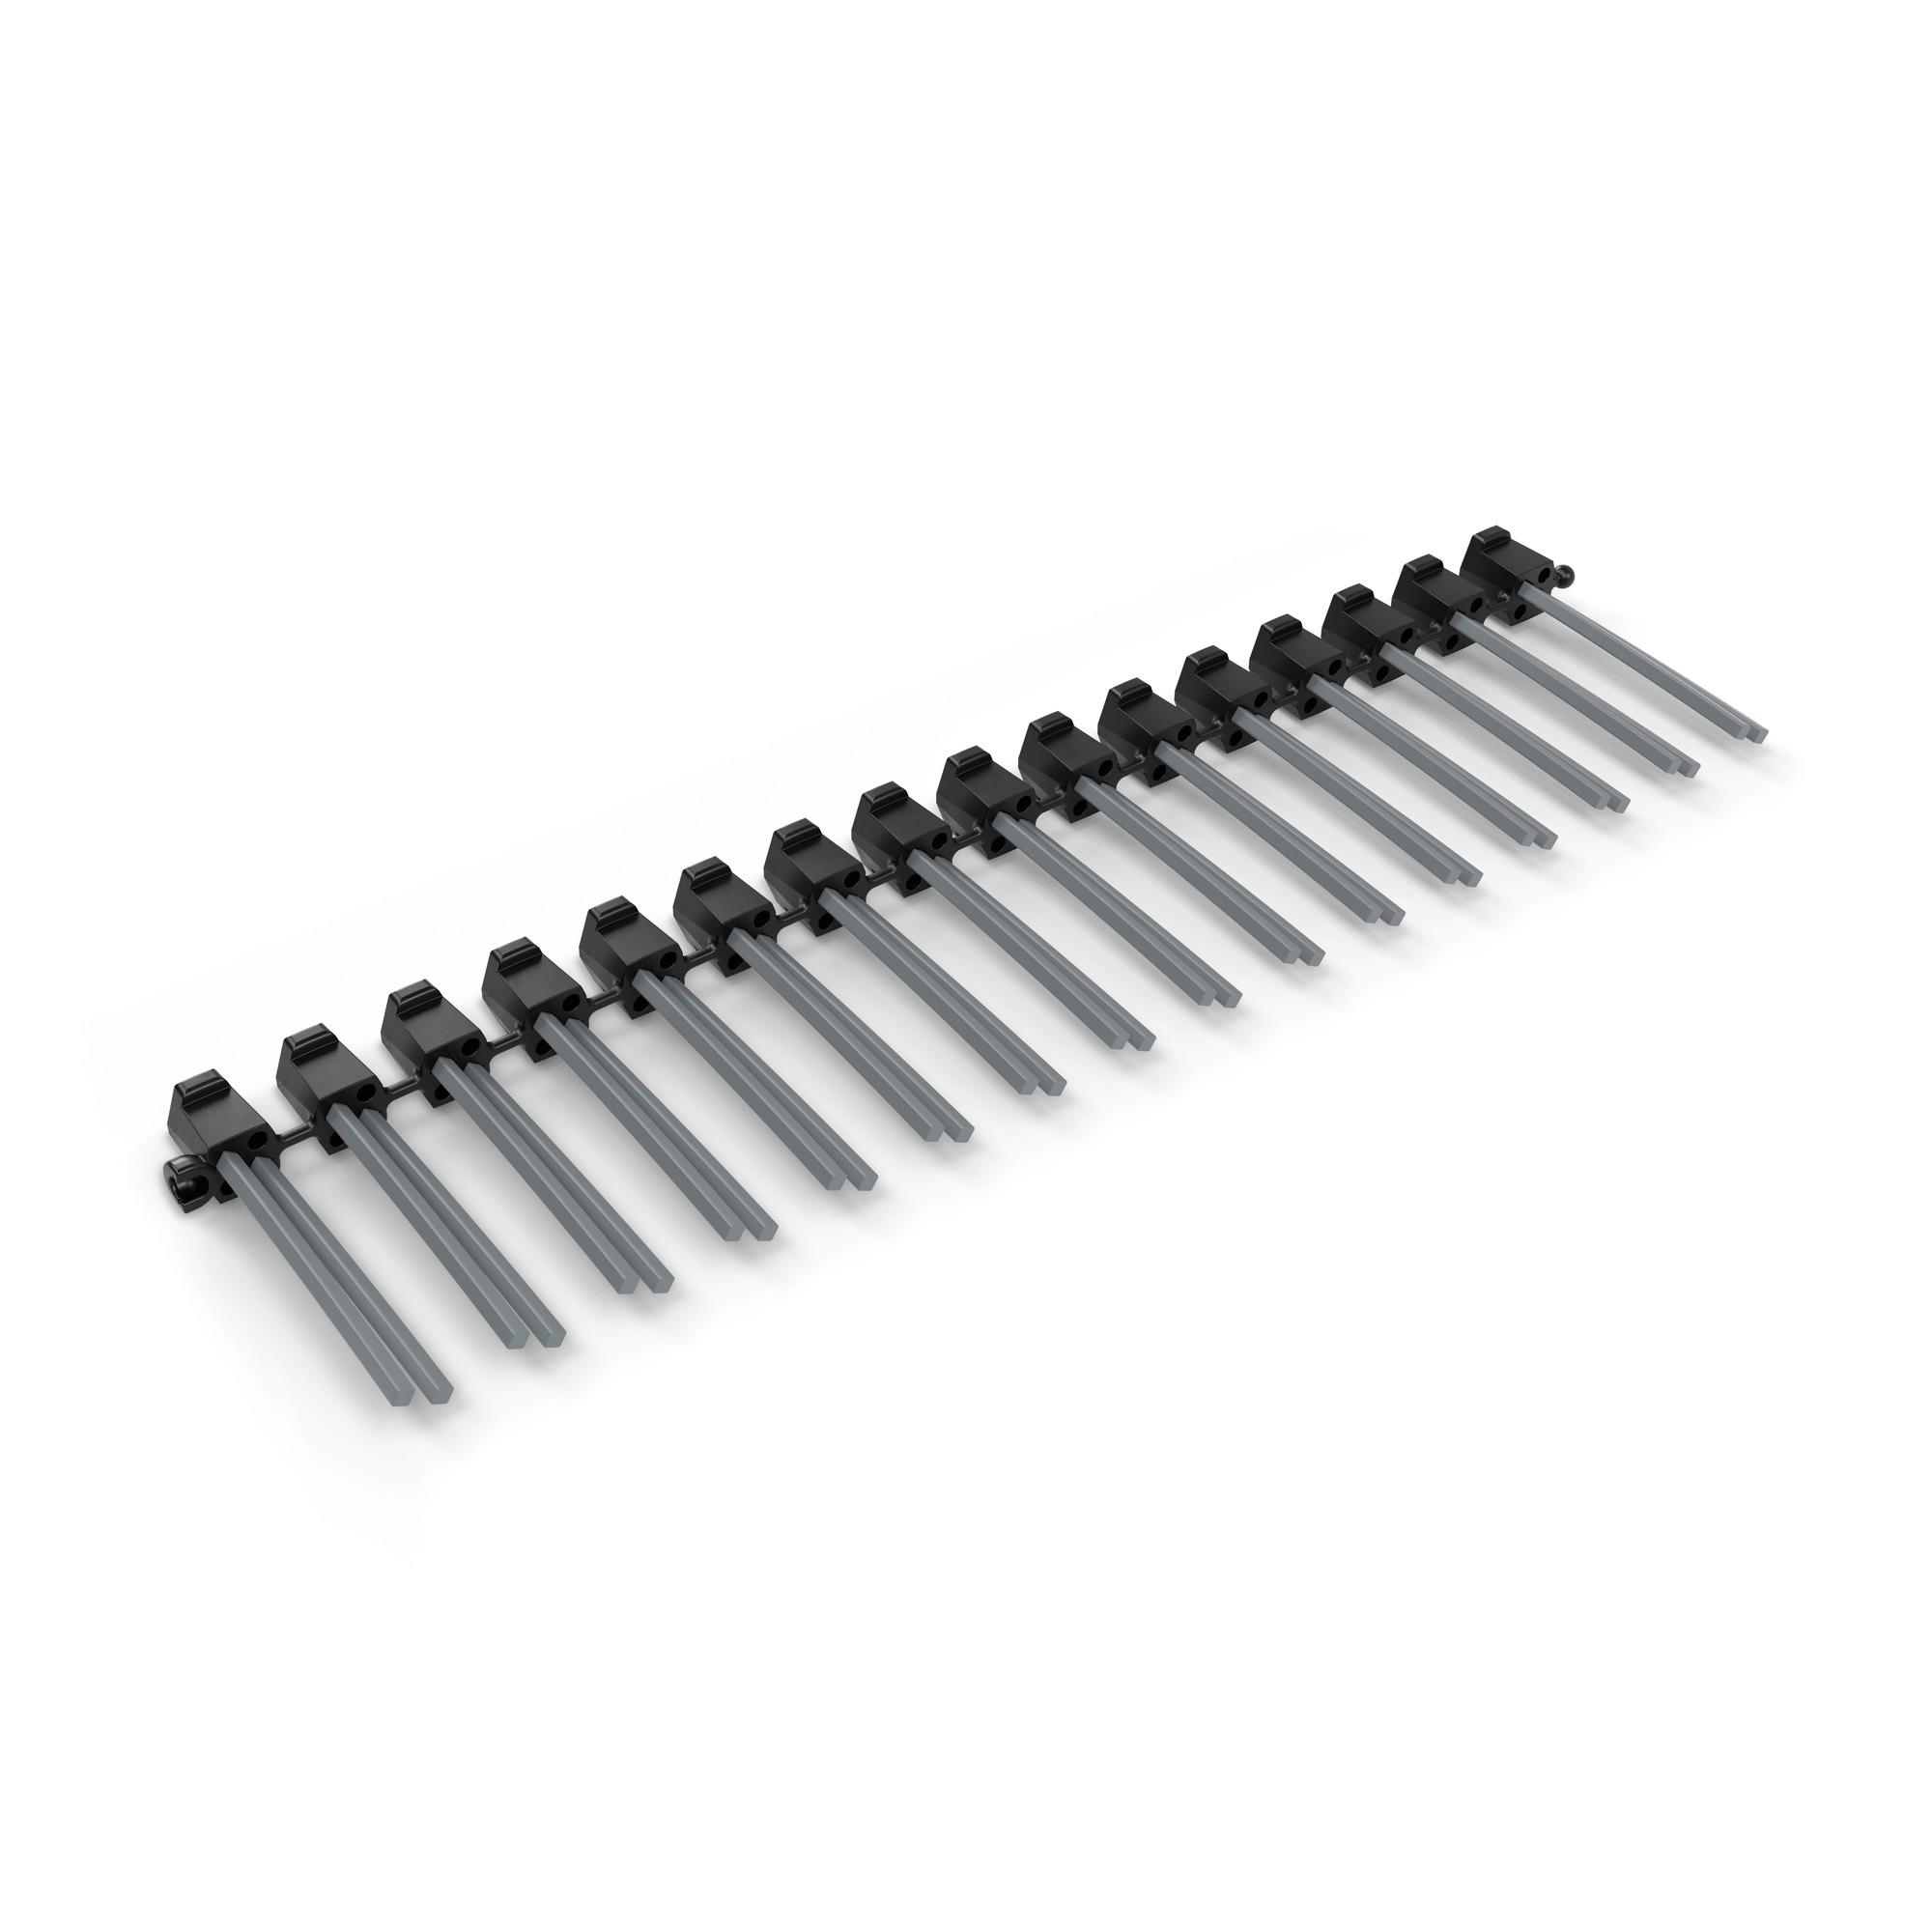 Karcher Weed remover bristle strip replacement